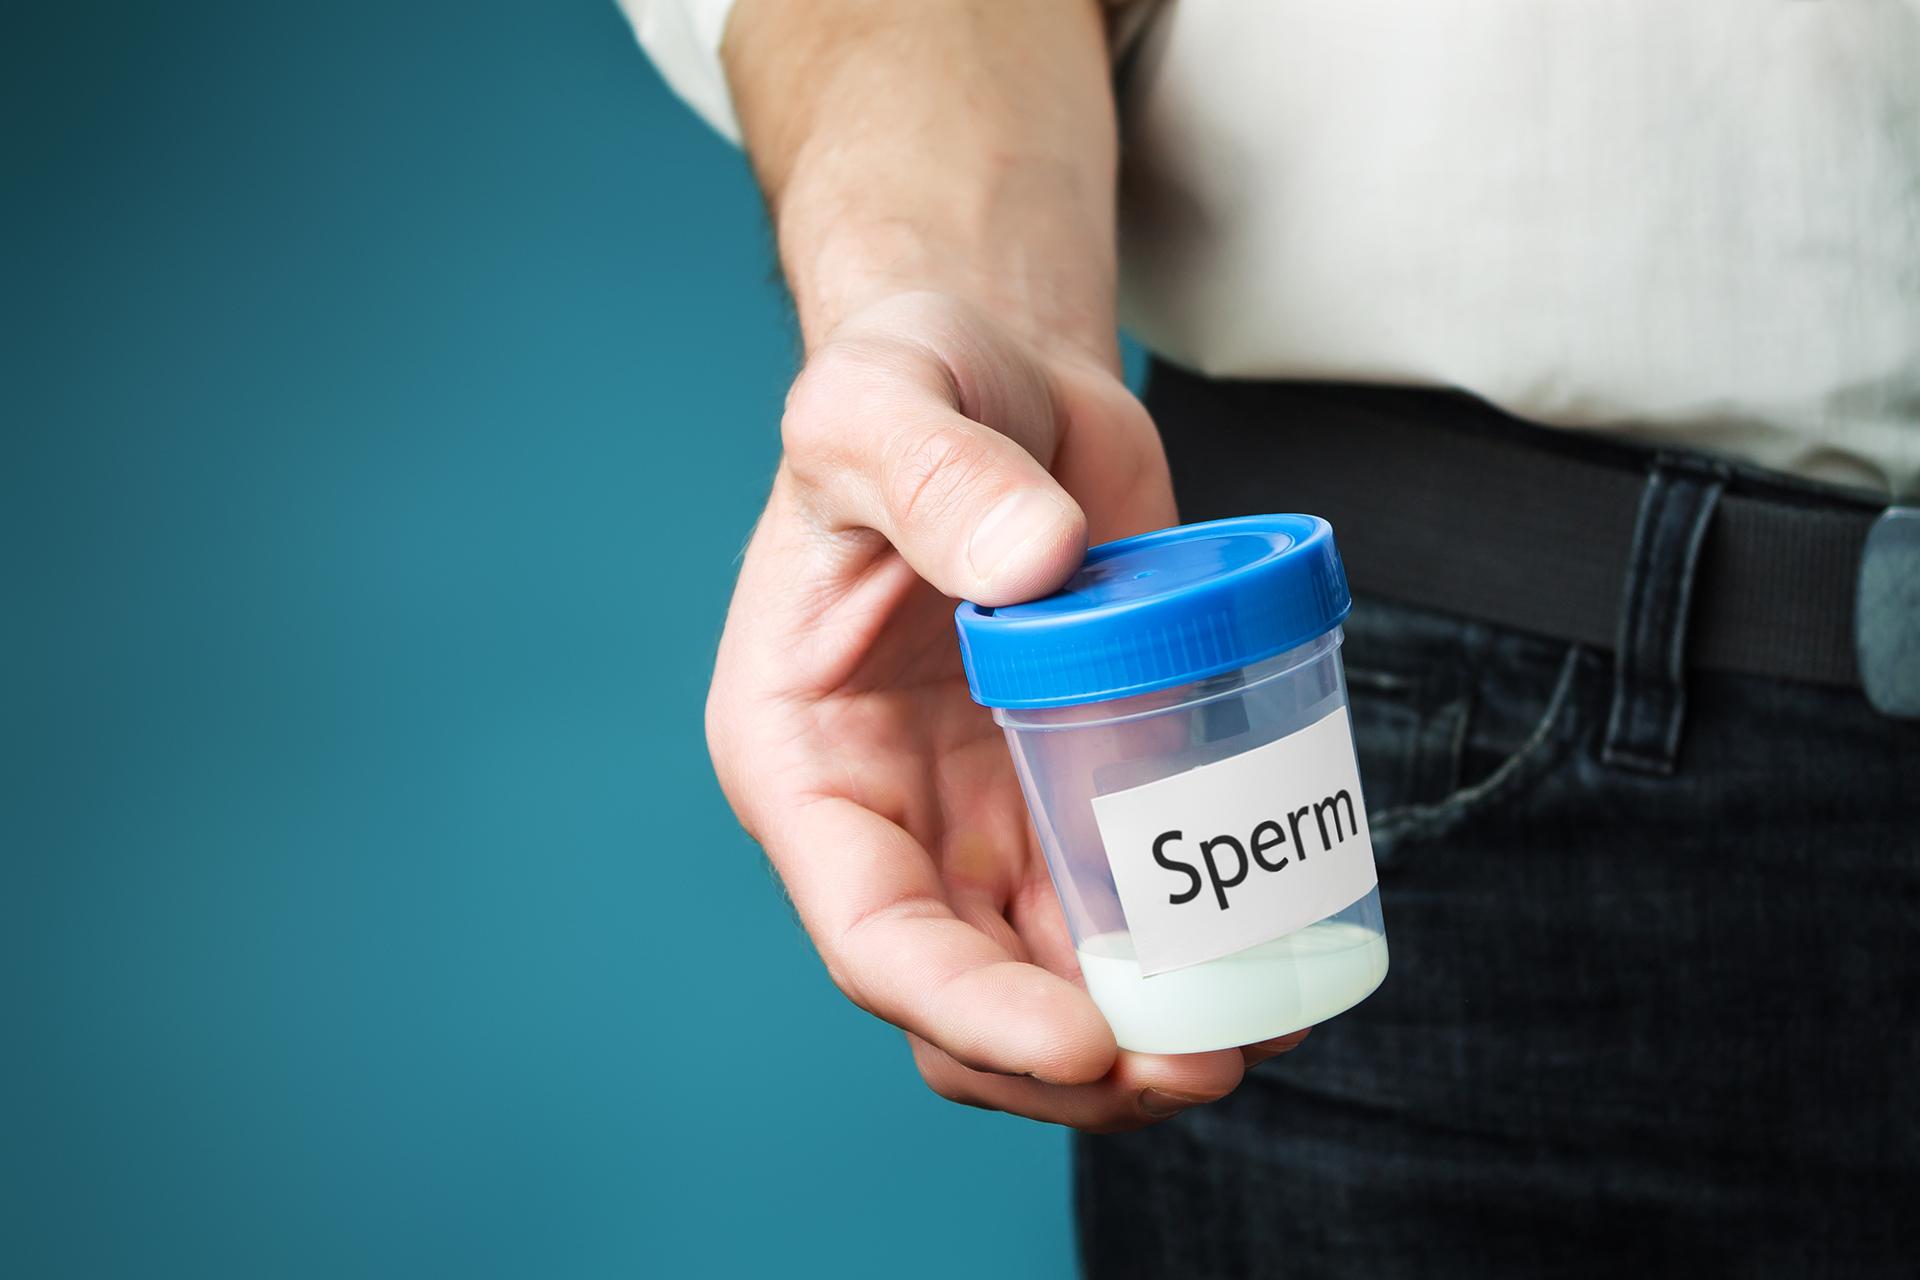 Low Sperm Count: Symptoms, Causes, Diagnosis and Test